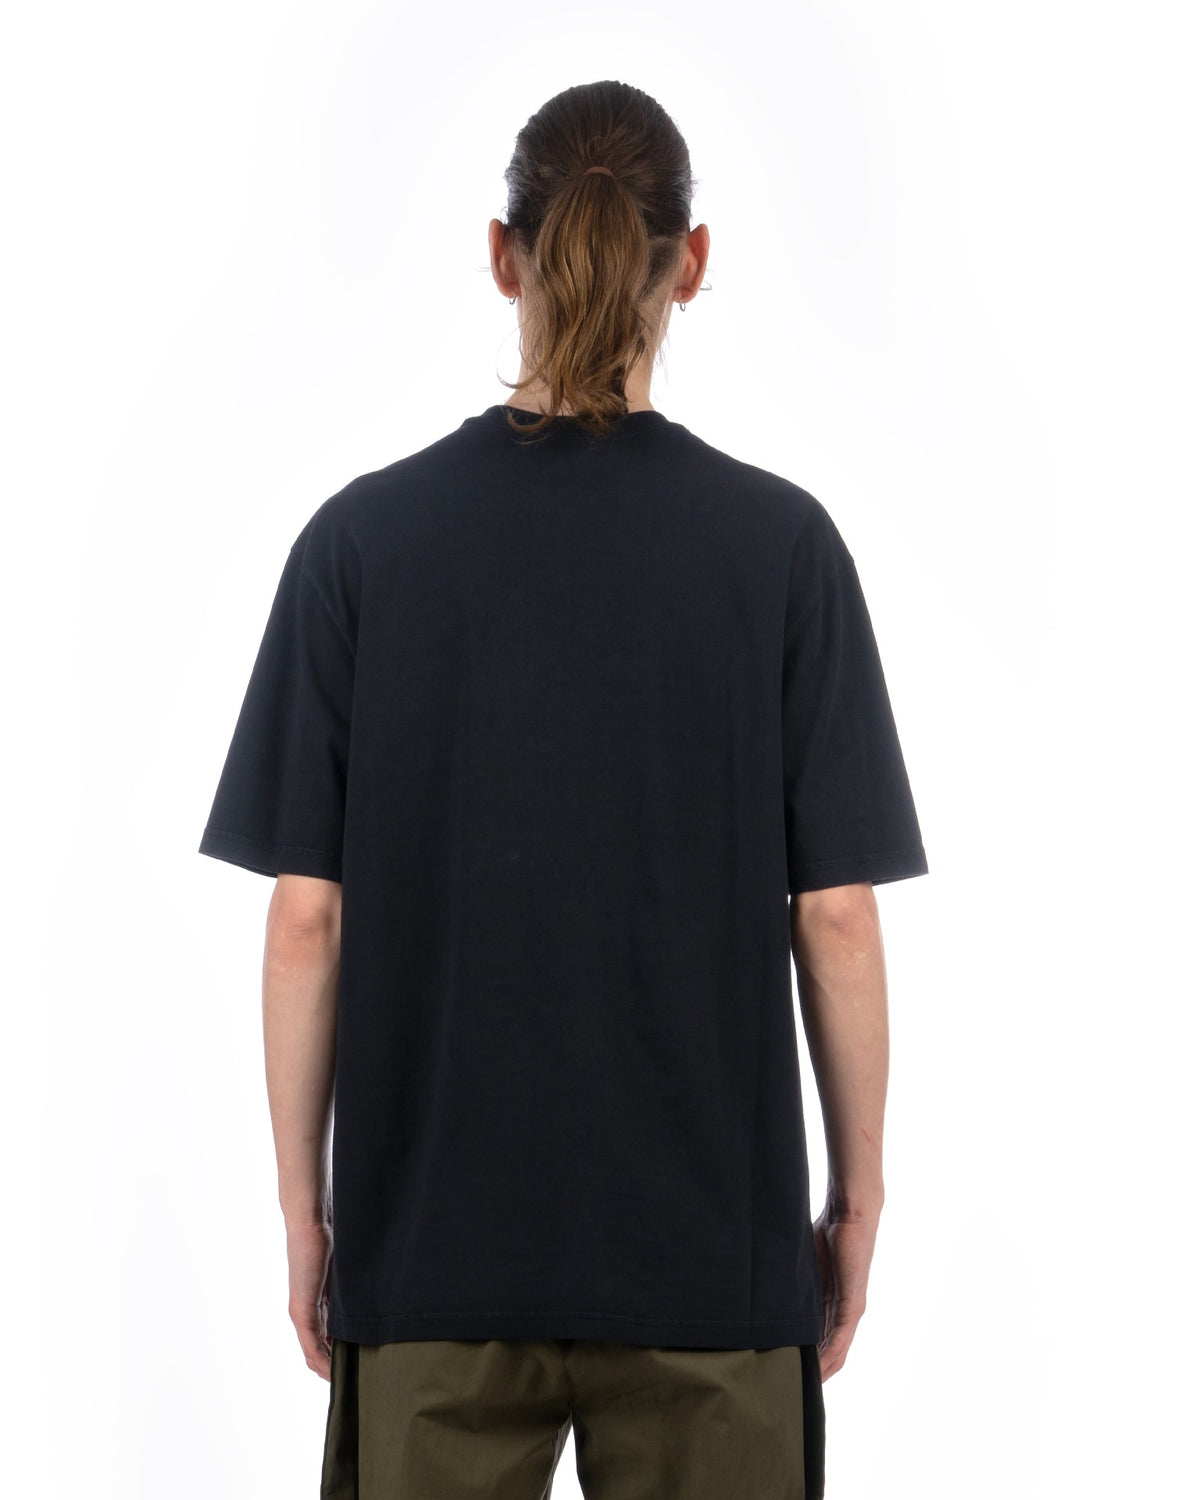 A-COLD-WALL* | Essential T-Shirt Onyx - Concrete